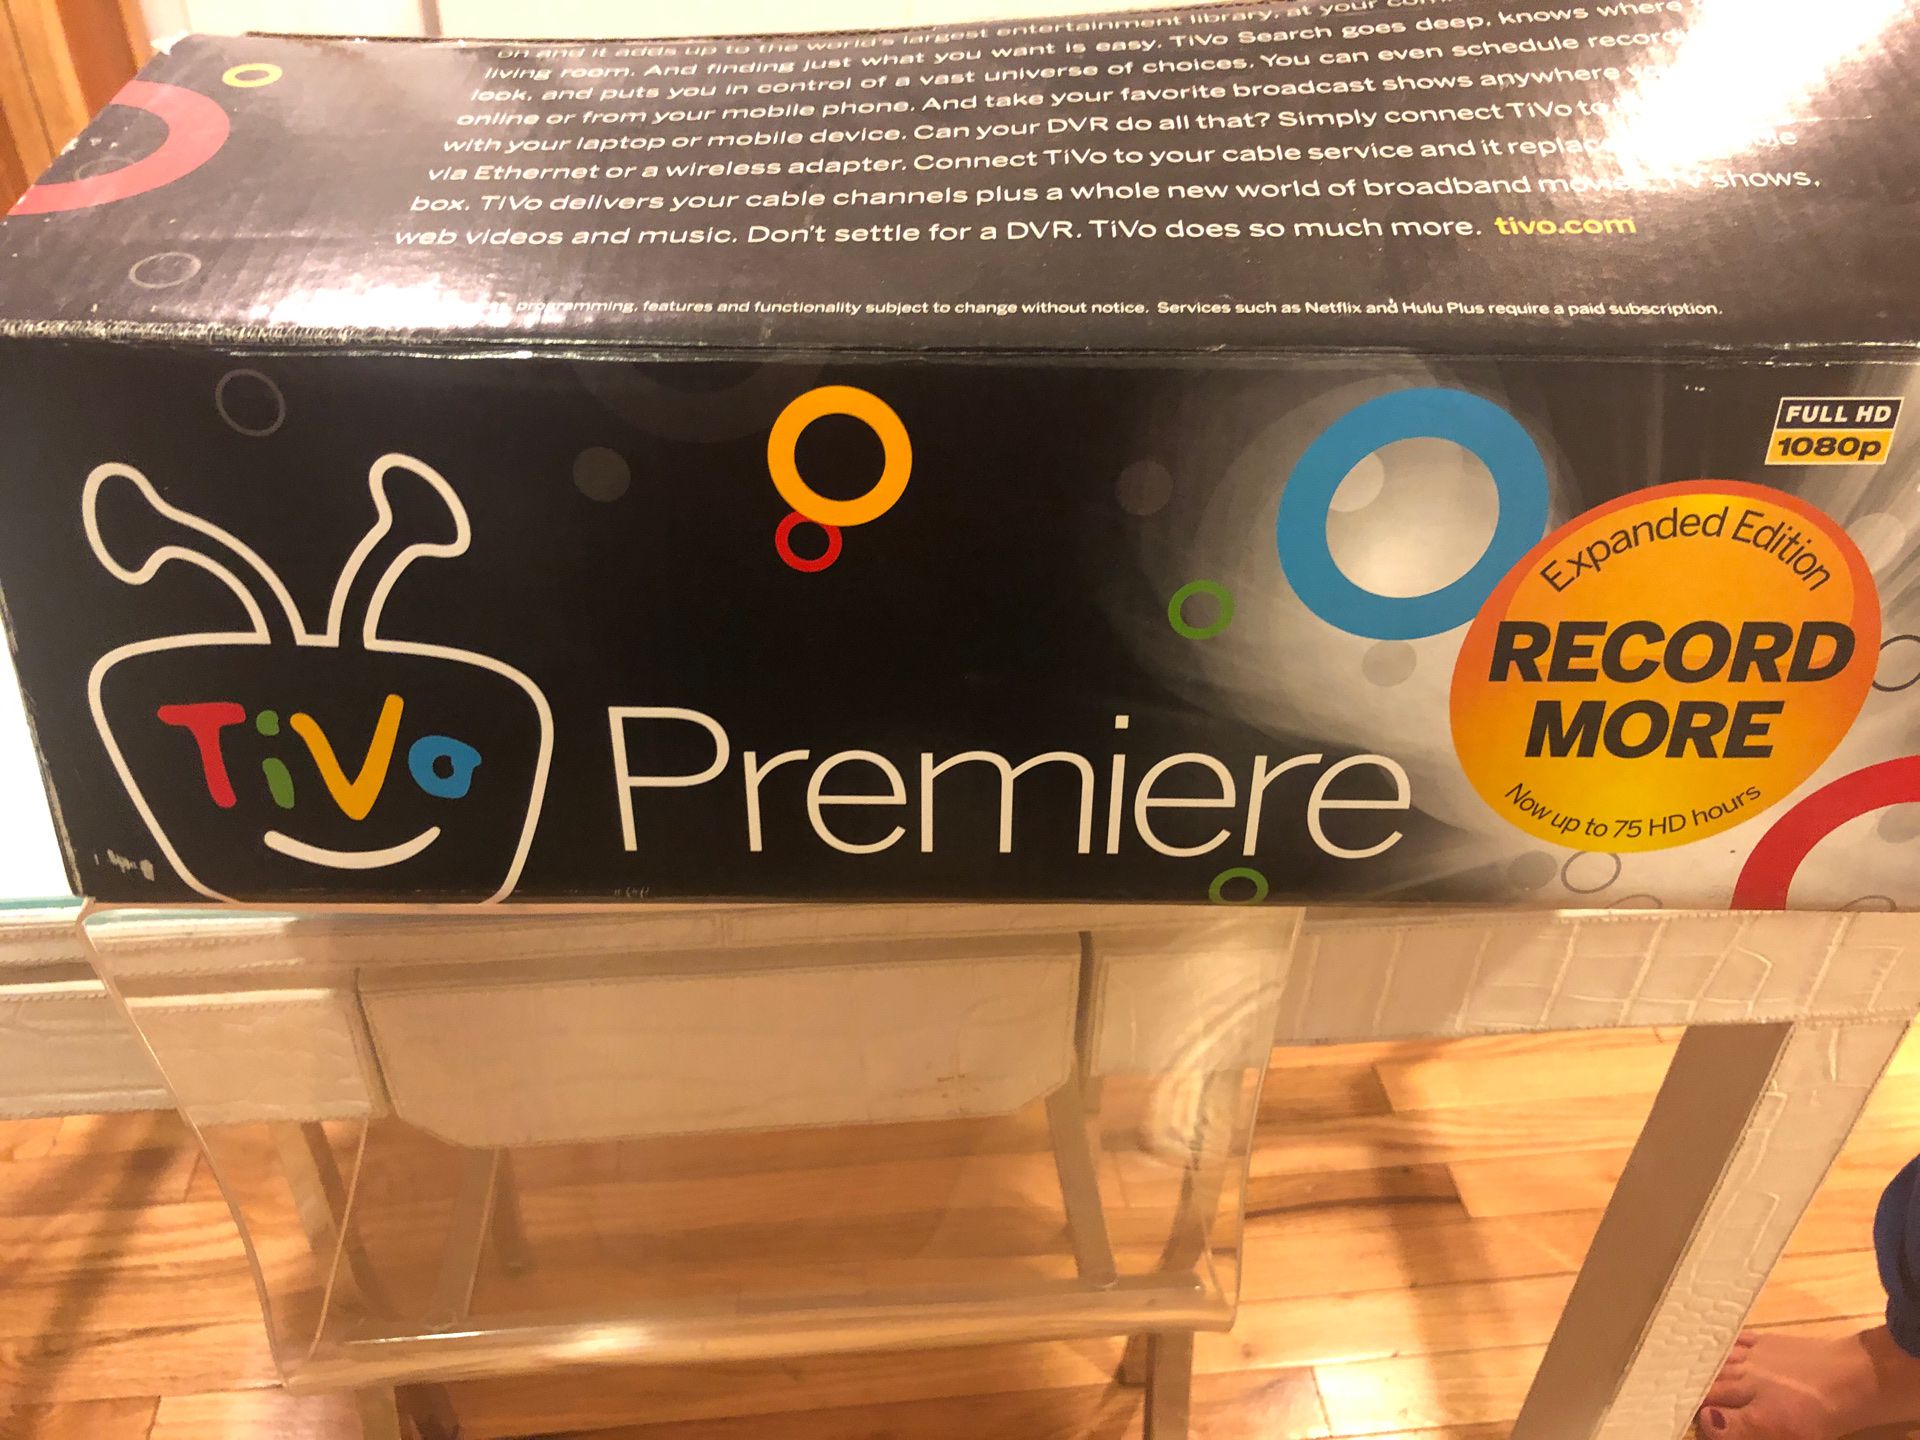 TiVo premiere system with remote